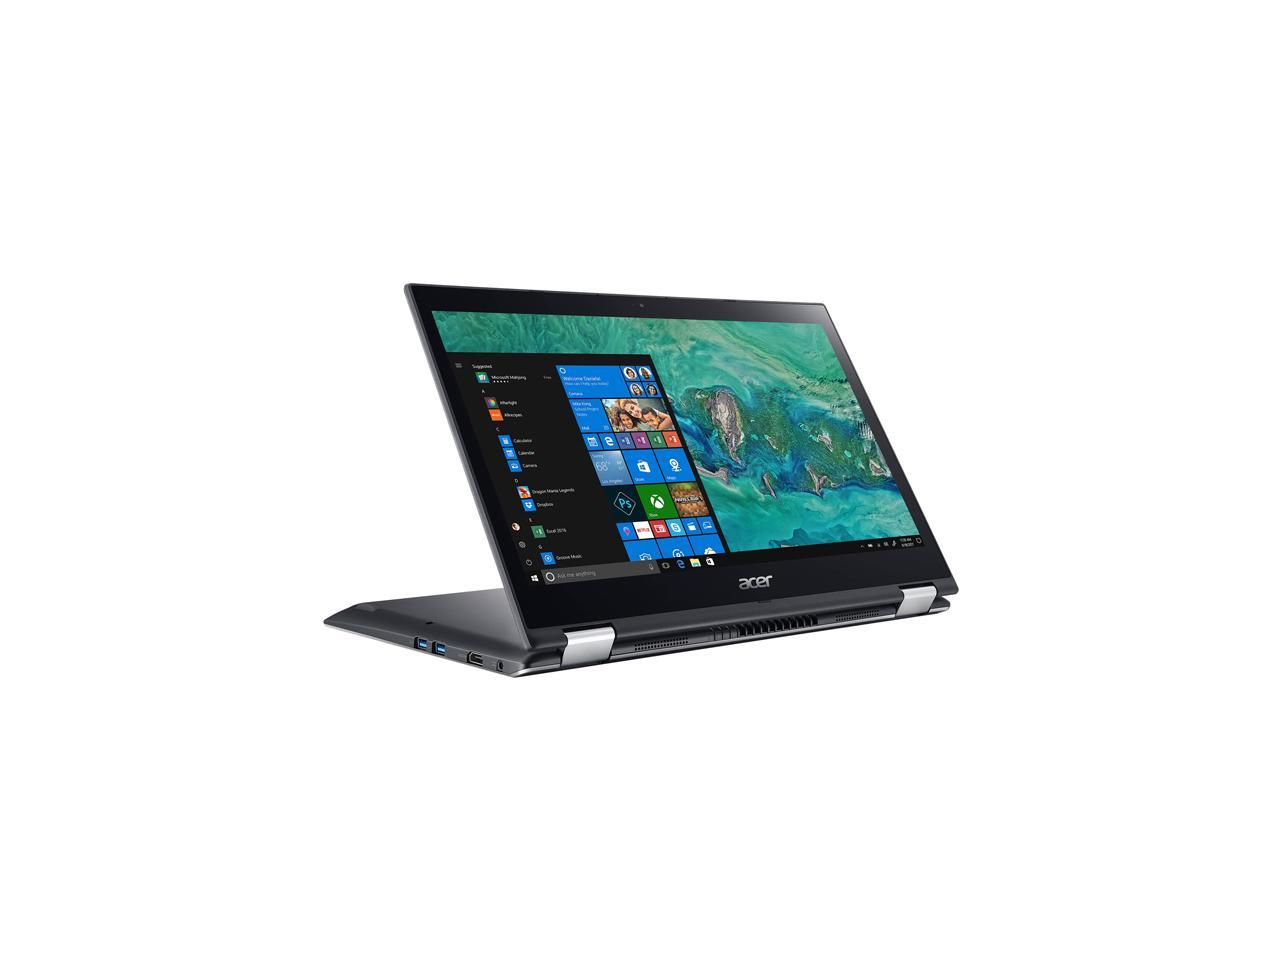 Acer Spin 3 SP314-51-33GR 14" Touchscreen LCD 2 in 1 Notebook - Intel Core i3 (8th Gen) i3-8130U Dual-core (2 Core) 2.20 GHz - 4 GB DDR4 SDRAM - 128 GB SSD - Windows 10 Home in S mode 64-bit - 1366 x 768 - Convertible - Steel Gray